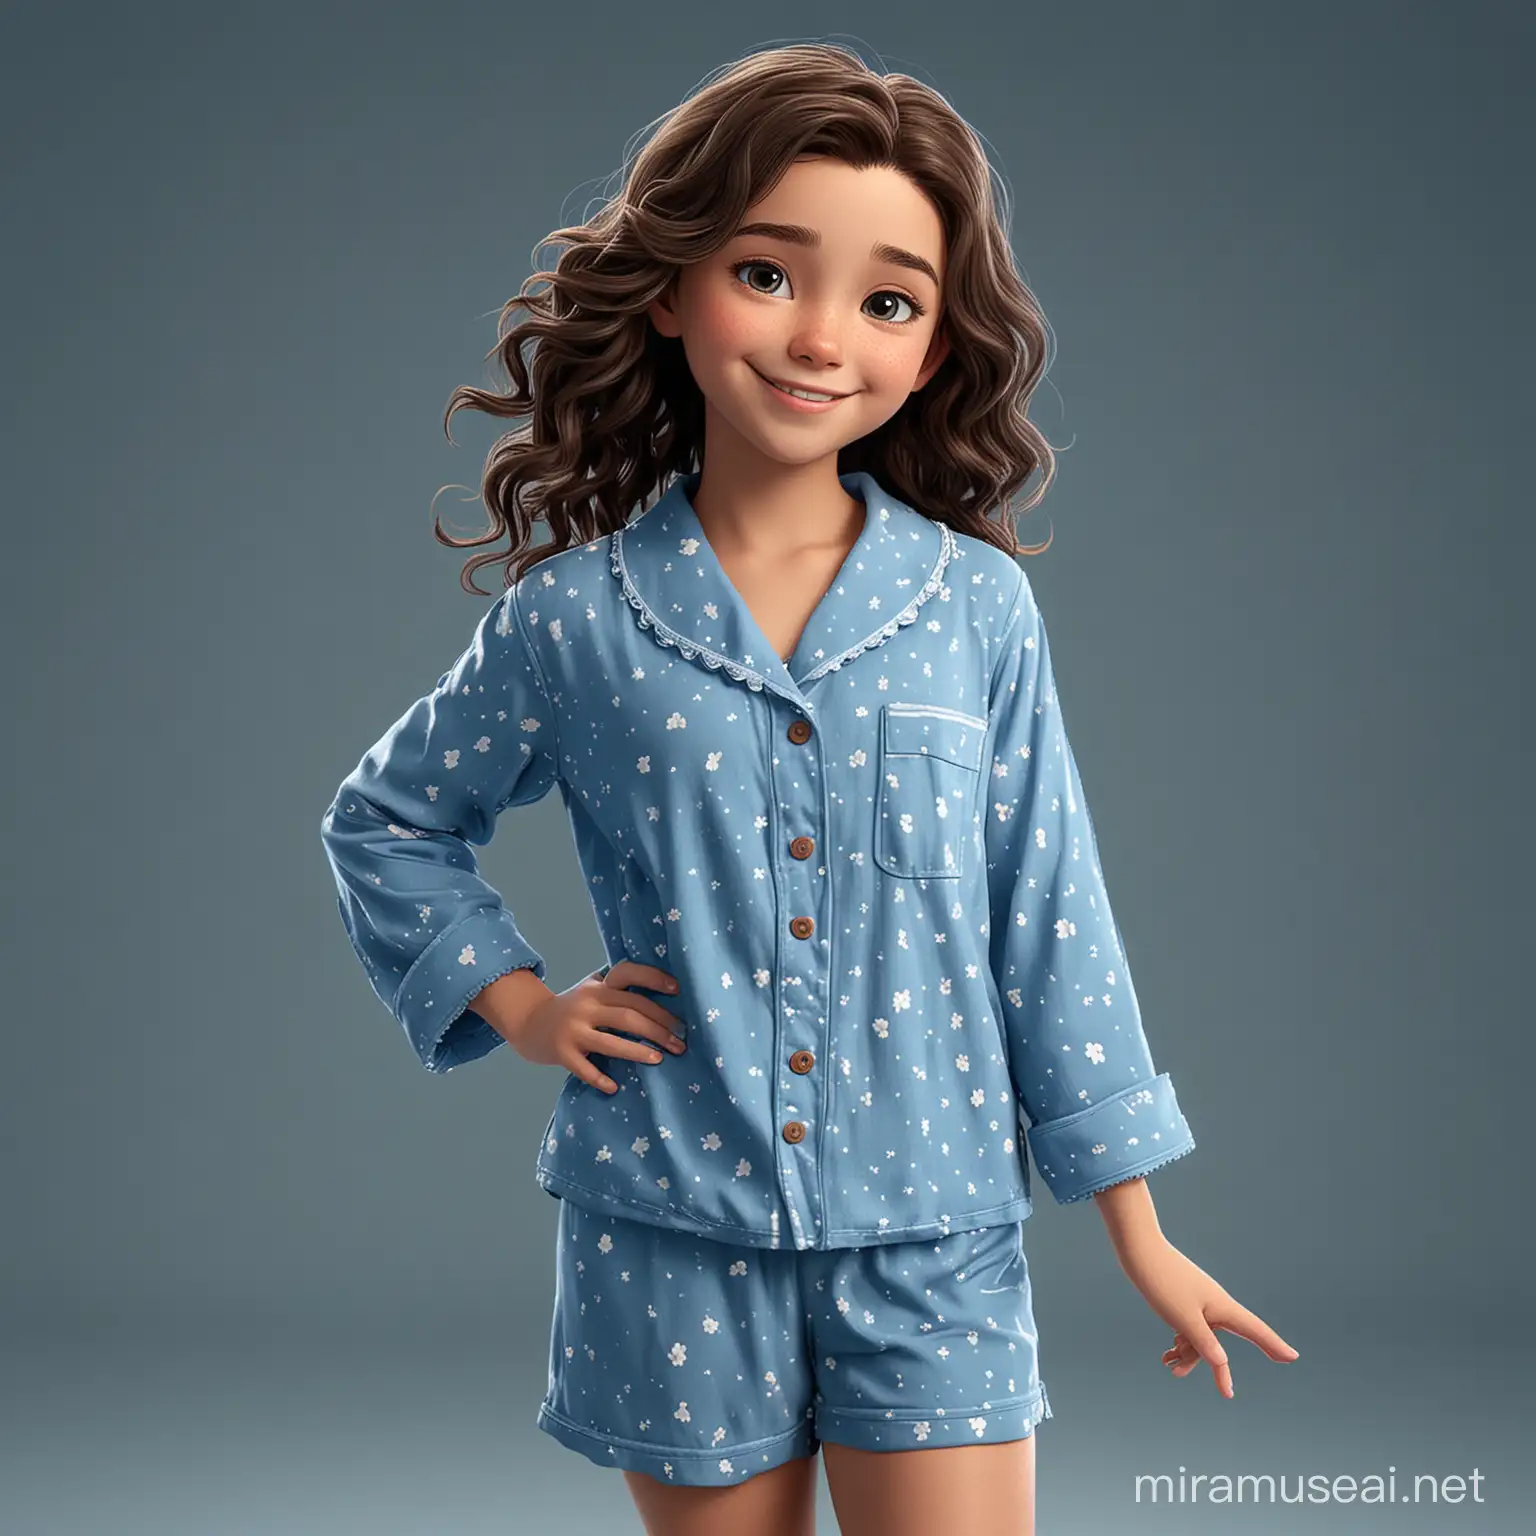 animation style, 13 year old mid sized girl, shoulder length, dark brown, wavy hair, full body, no background, happy, wearing cute blue pajamas, no socks, no shoes